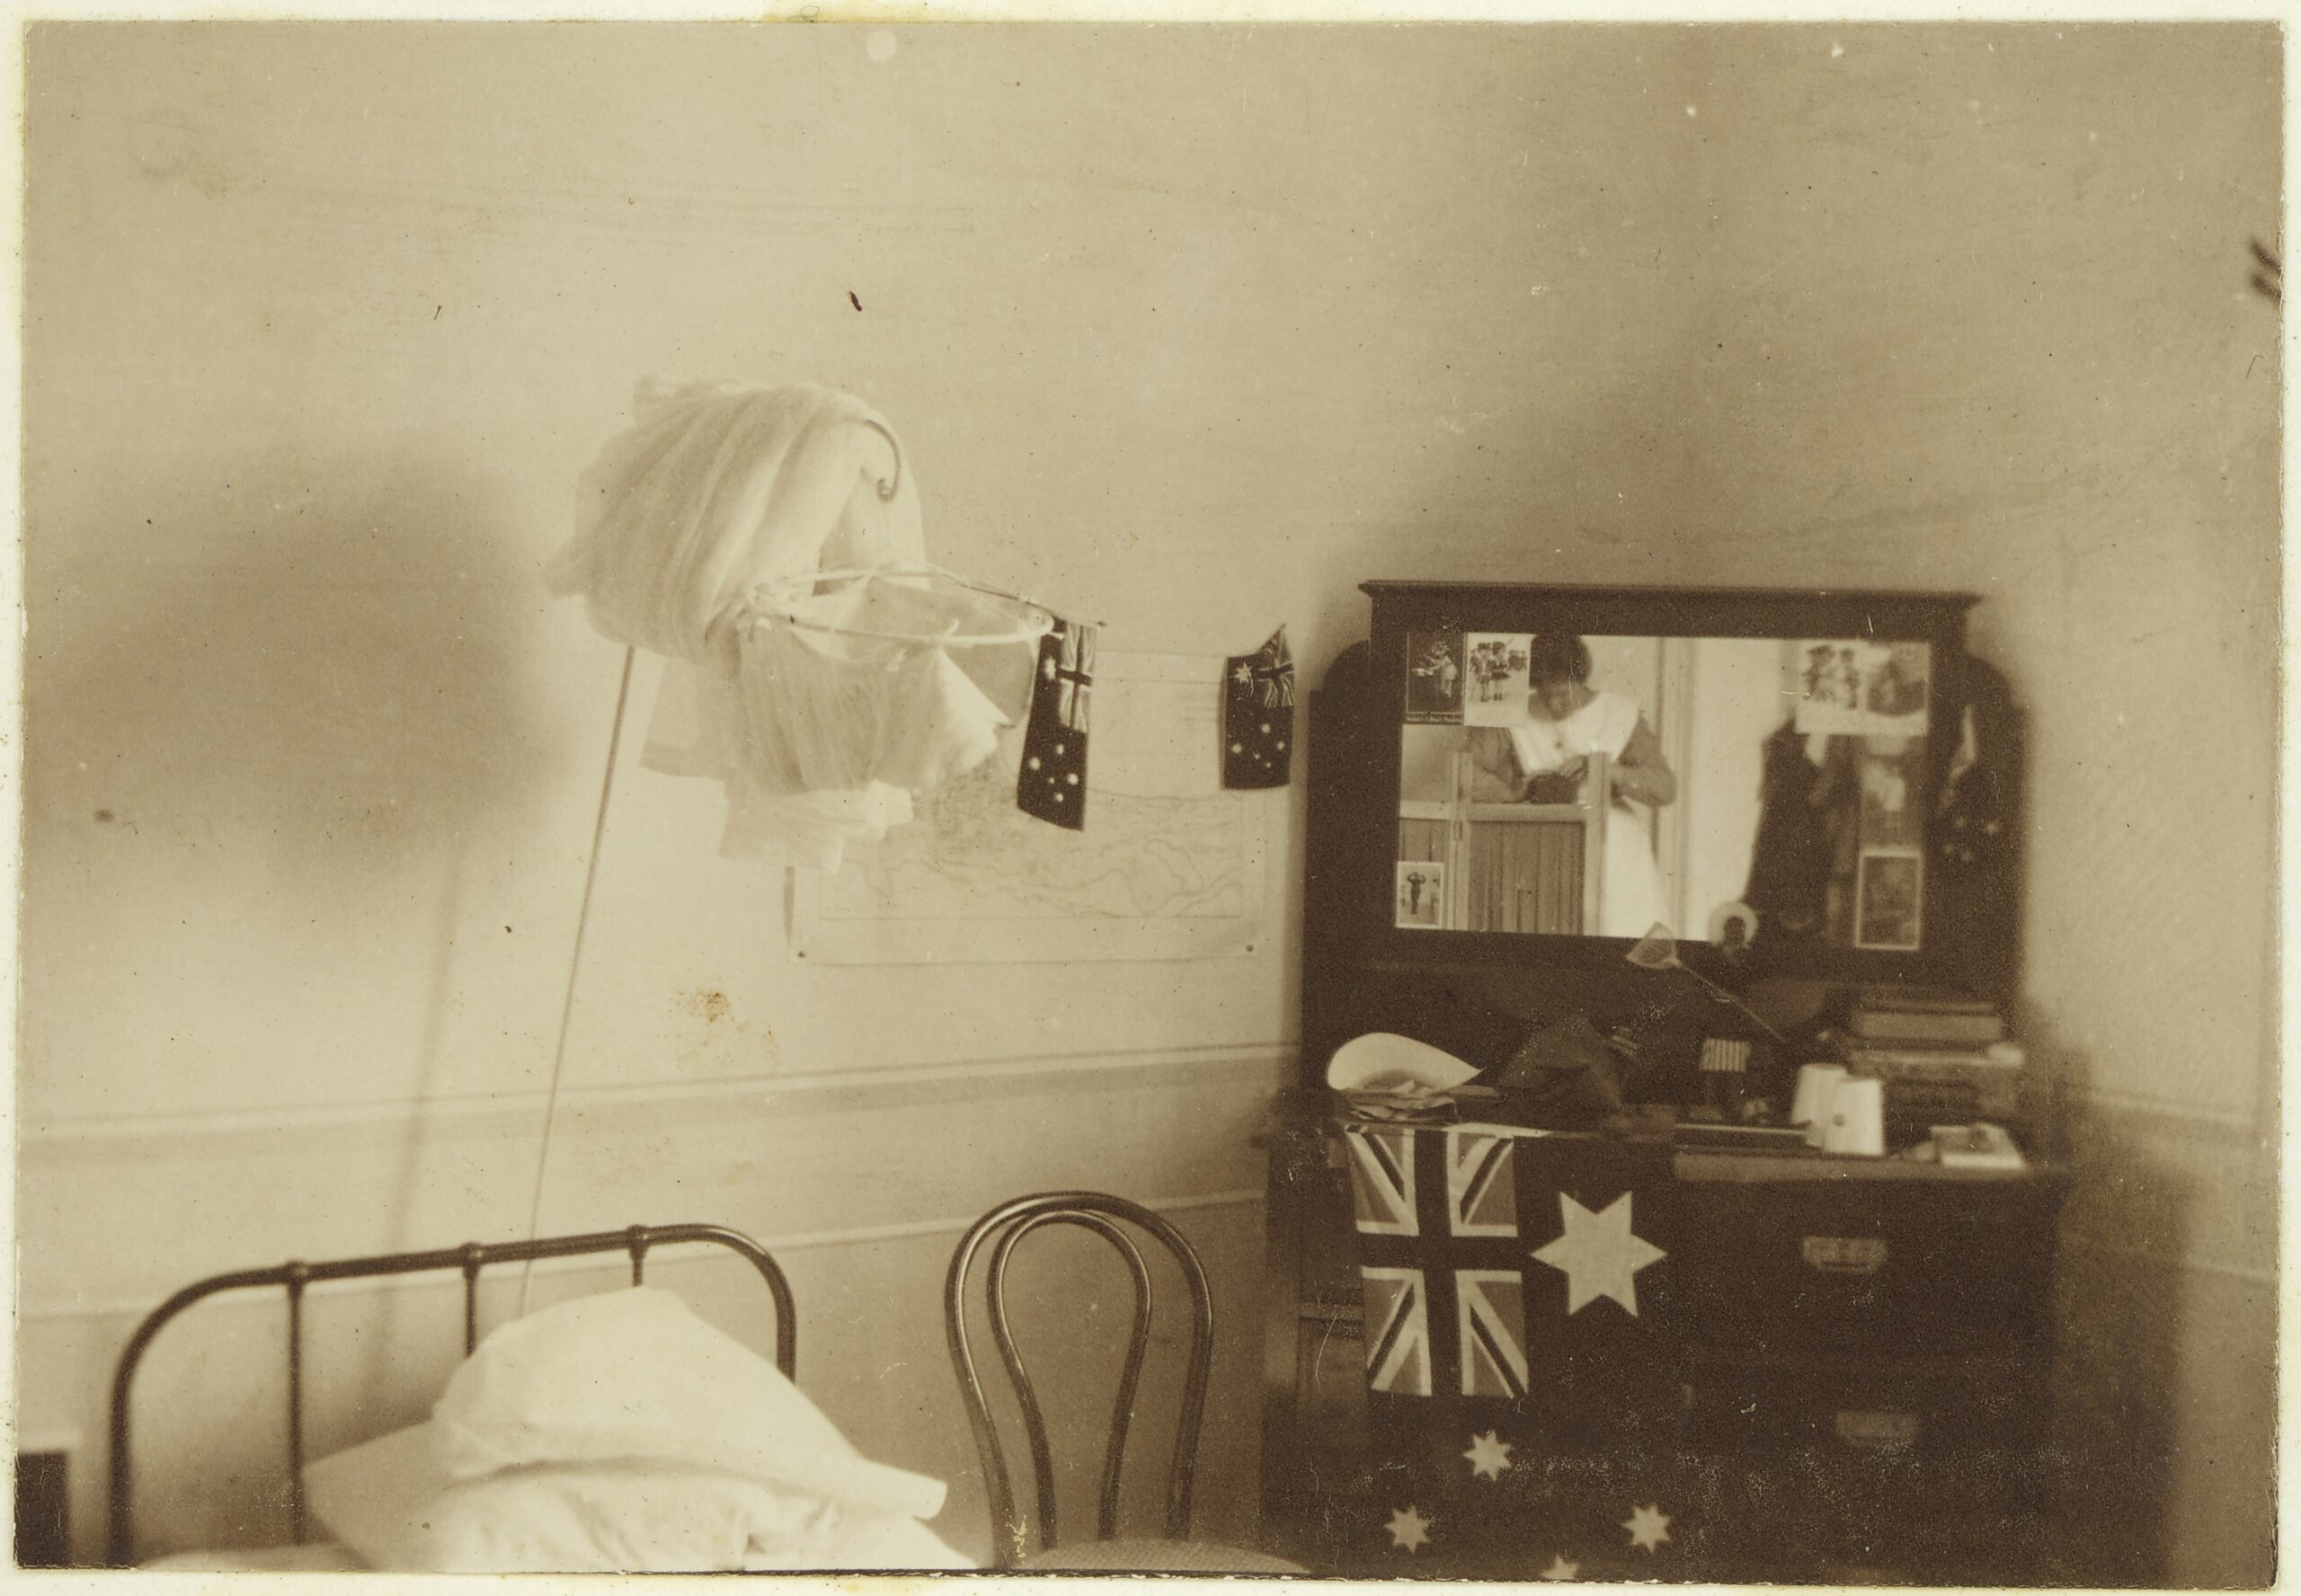 A small room is shown containing a single bed, dresser, mosquito net and several Australian flags hung on multiple surfaces. Assorted belongings are placed upon the dresser, and photos stuck to the mirror above it.